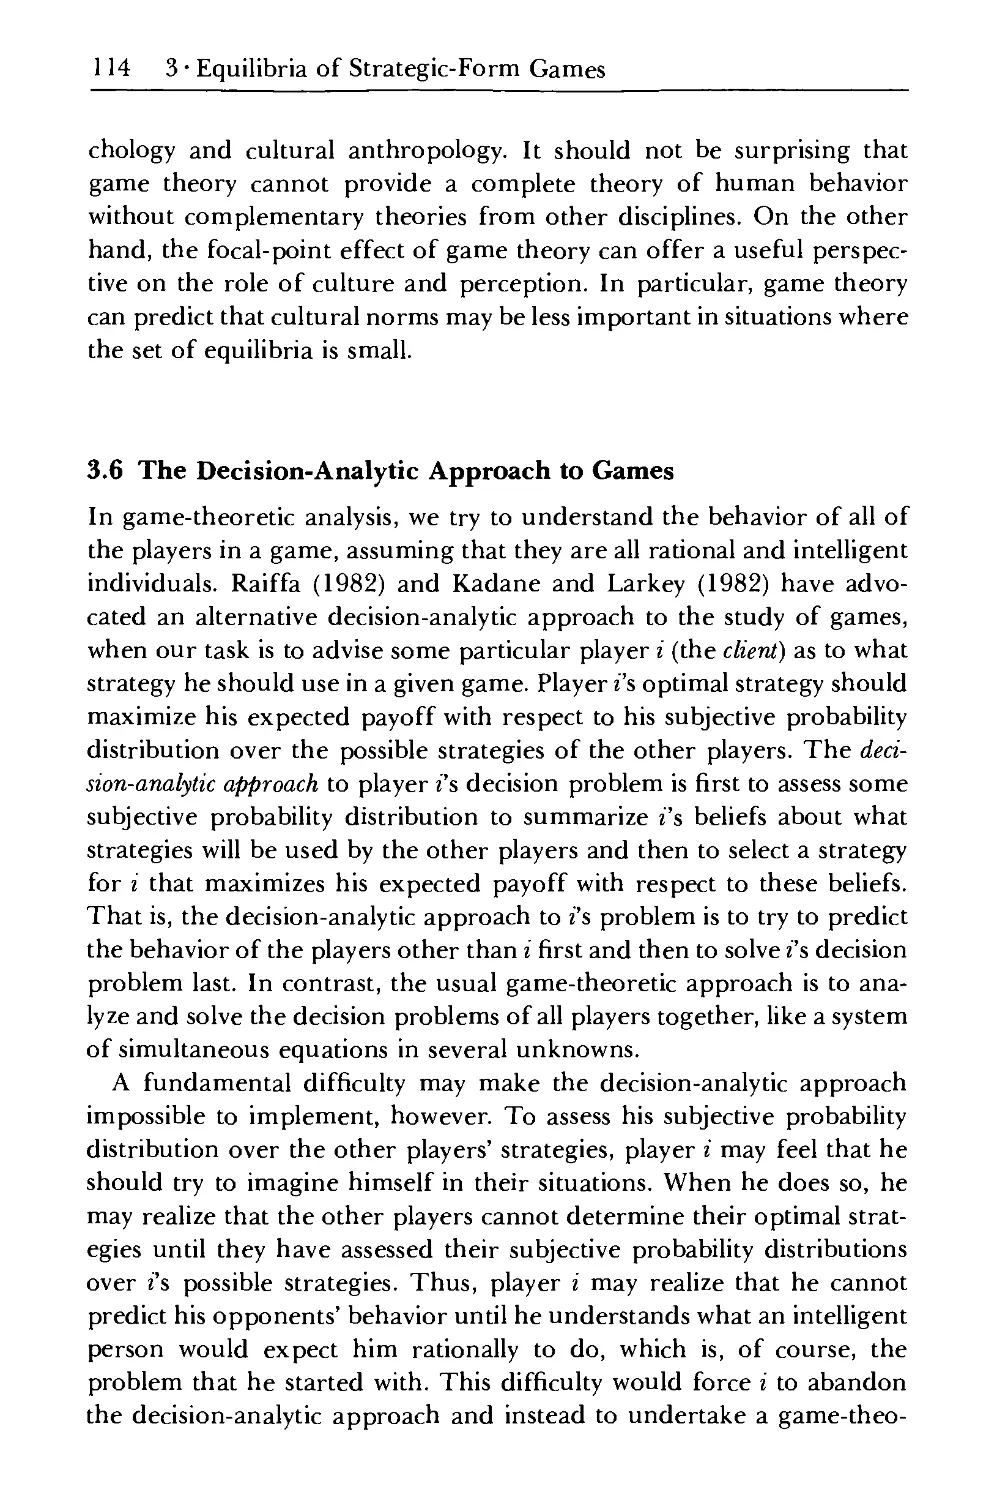 3.6 The Decision-Analytic Approach to Games